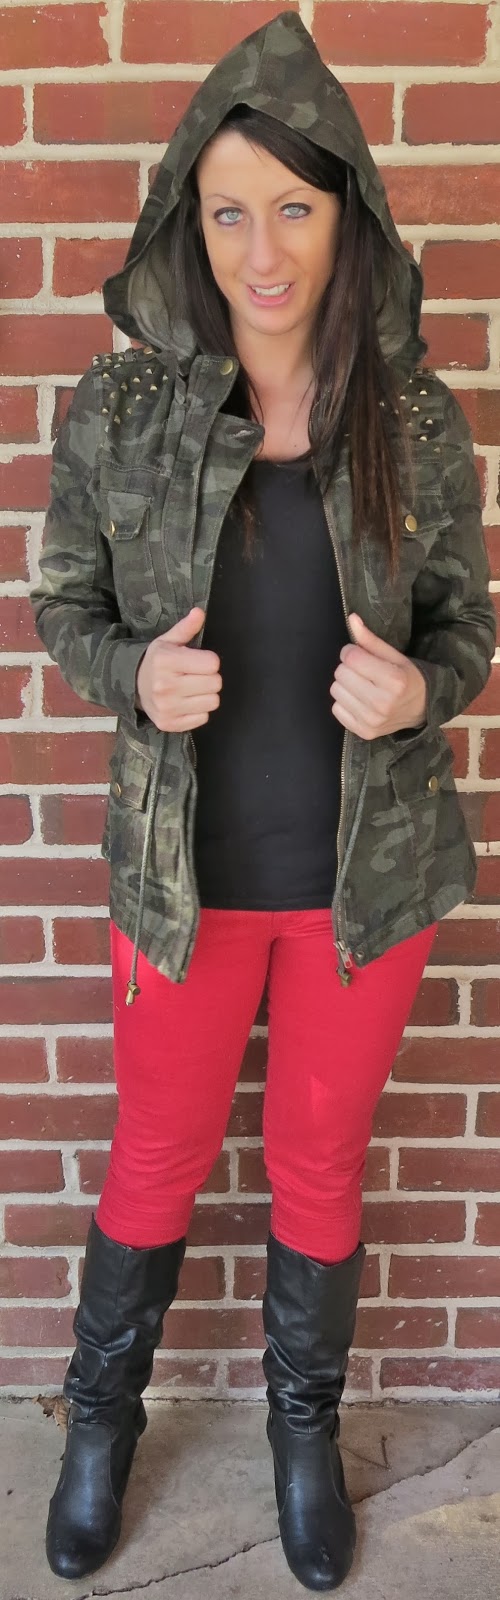 annie jean apparel, camo, Fashion, ootd, Outfit Ideas, outfit of the day, Outfits, red pants